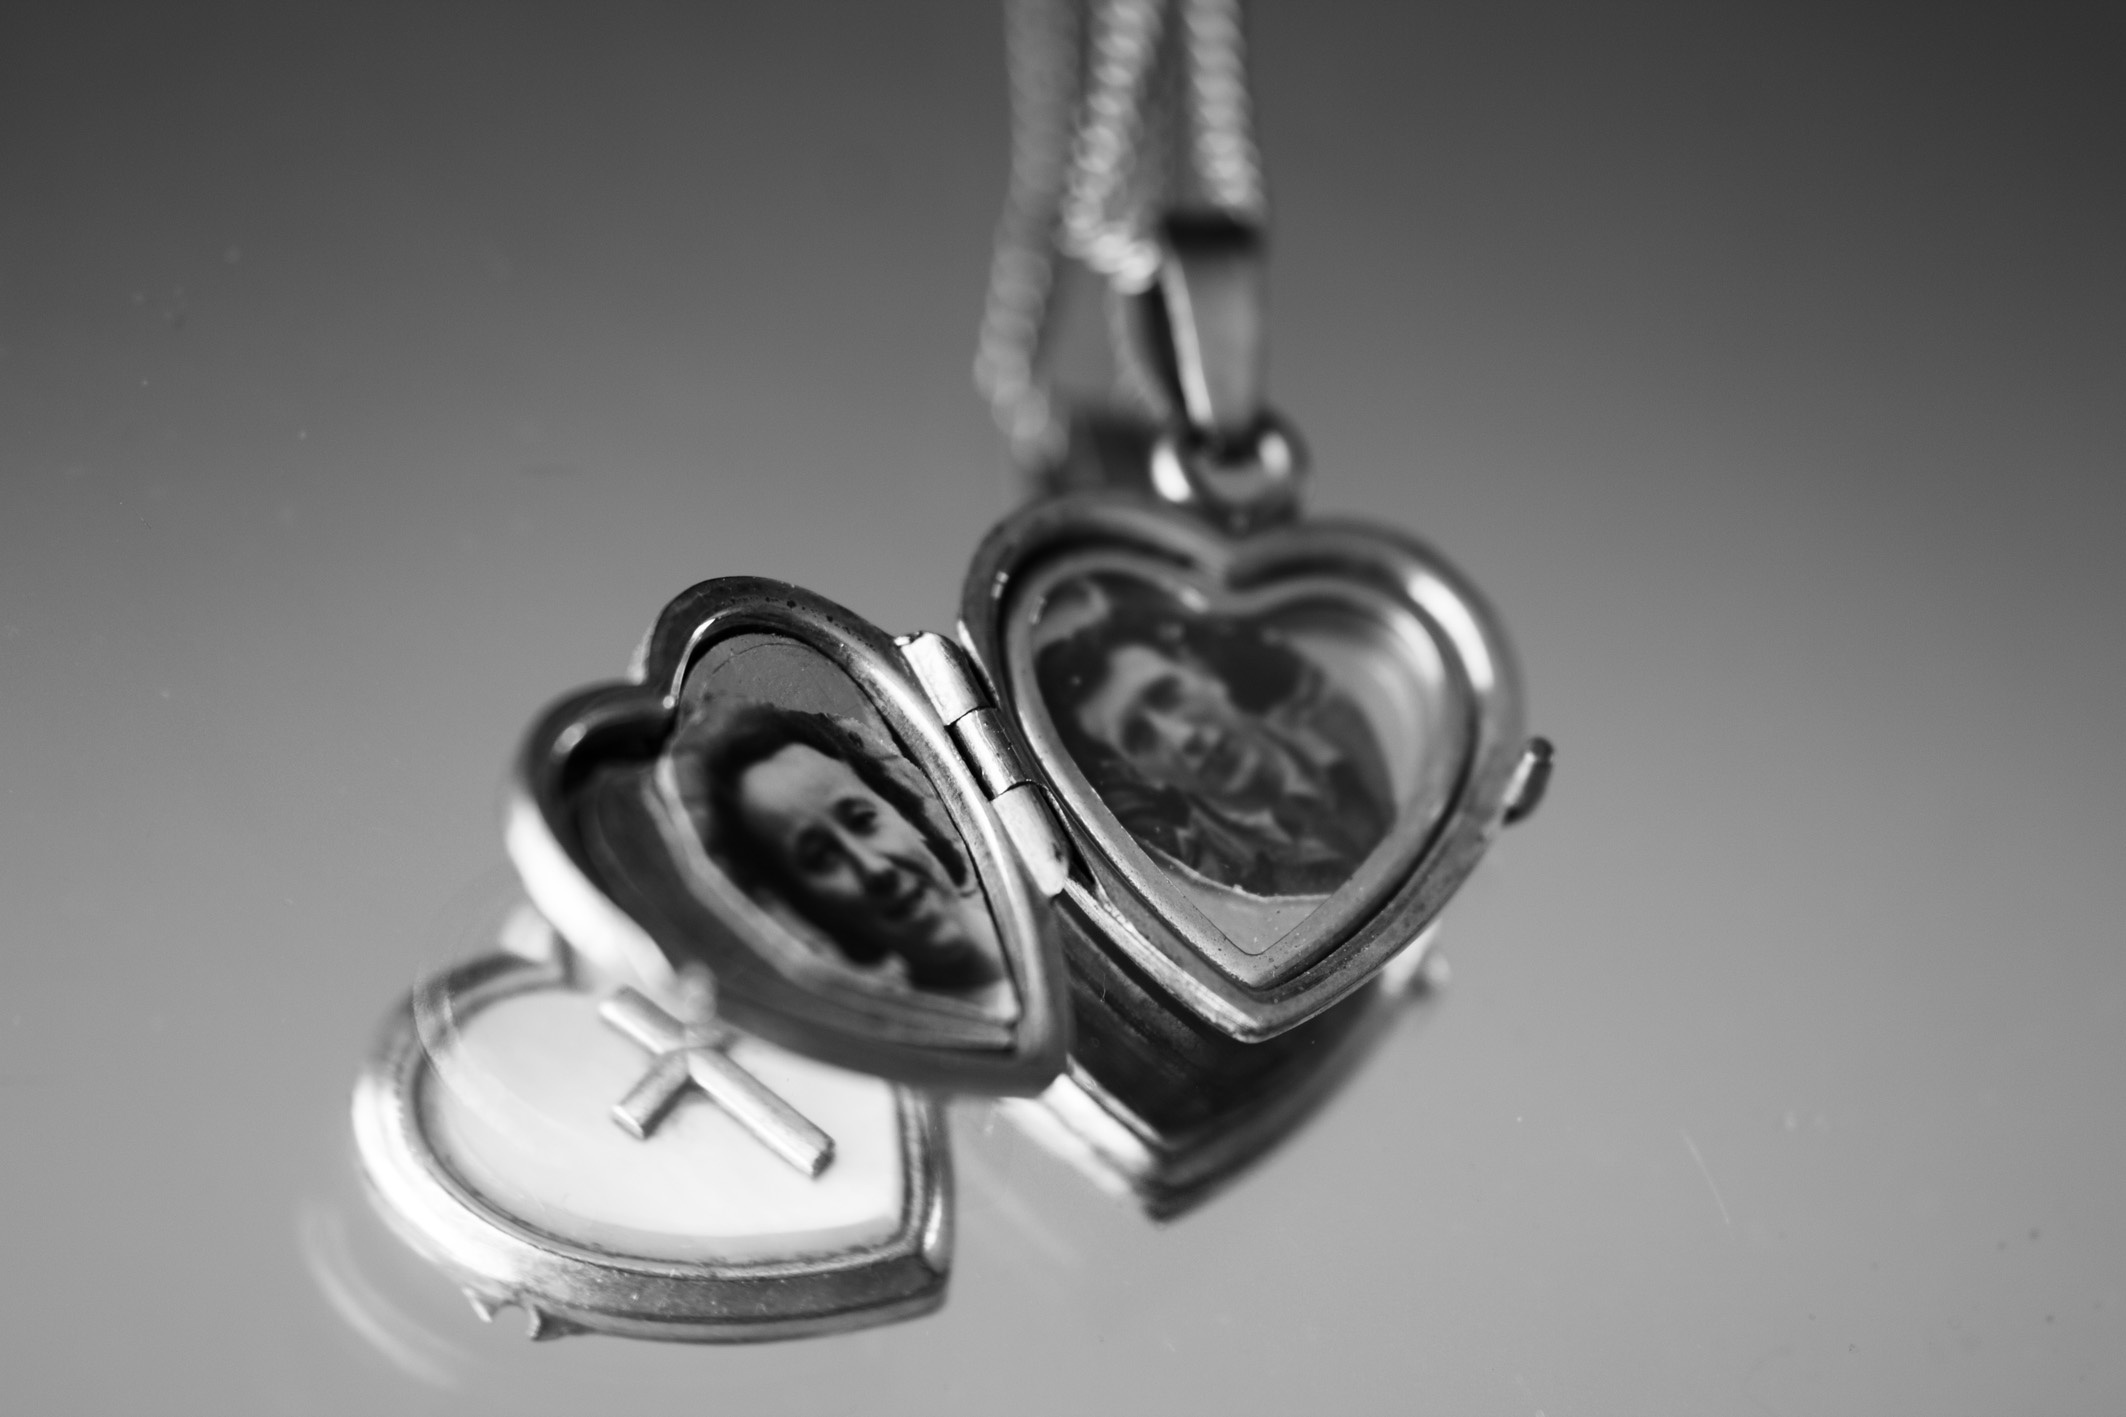 Silver locket, black and white photography, fashion accessory, close-up, 2130x1420 HD Desktop